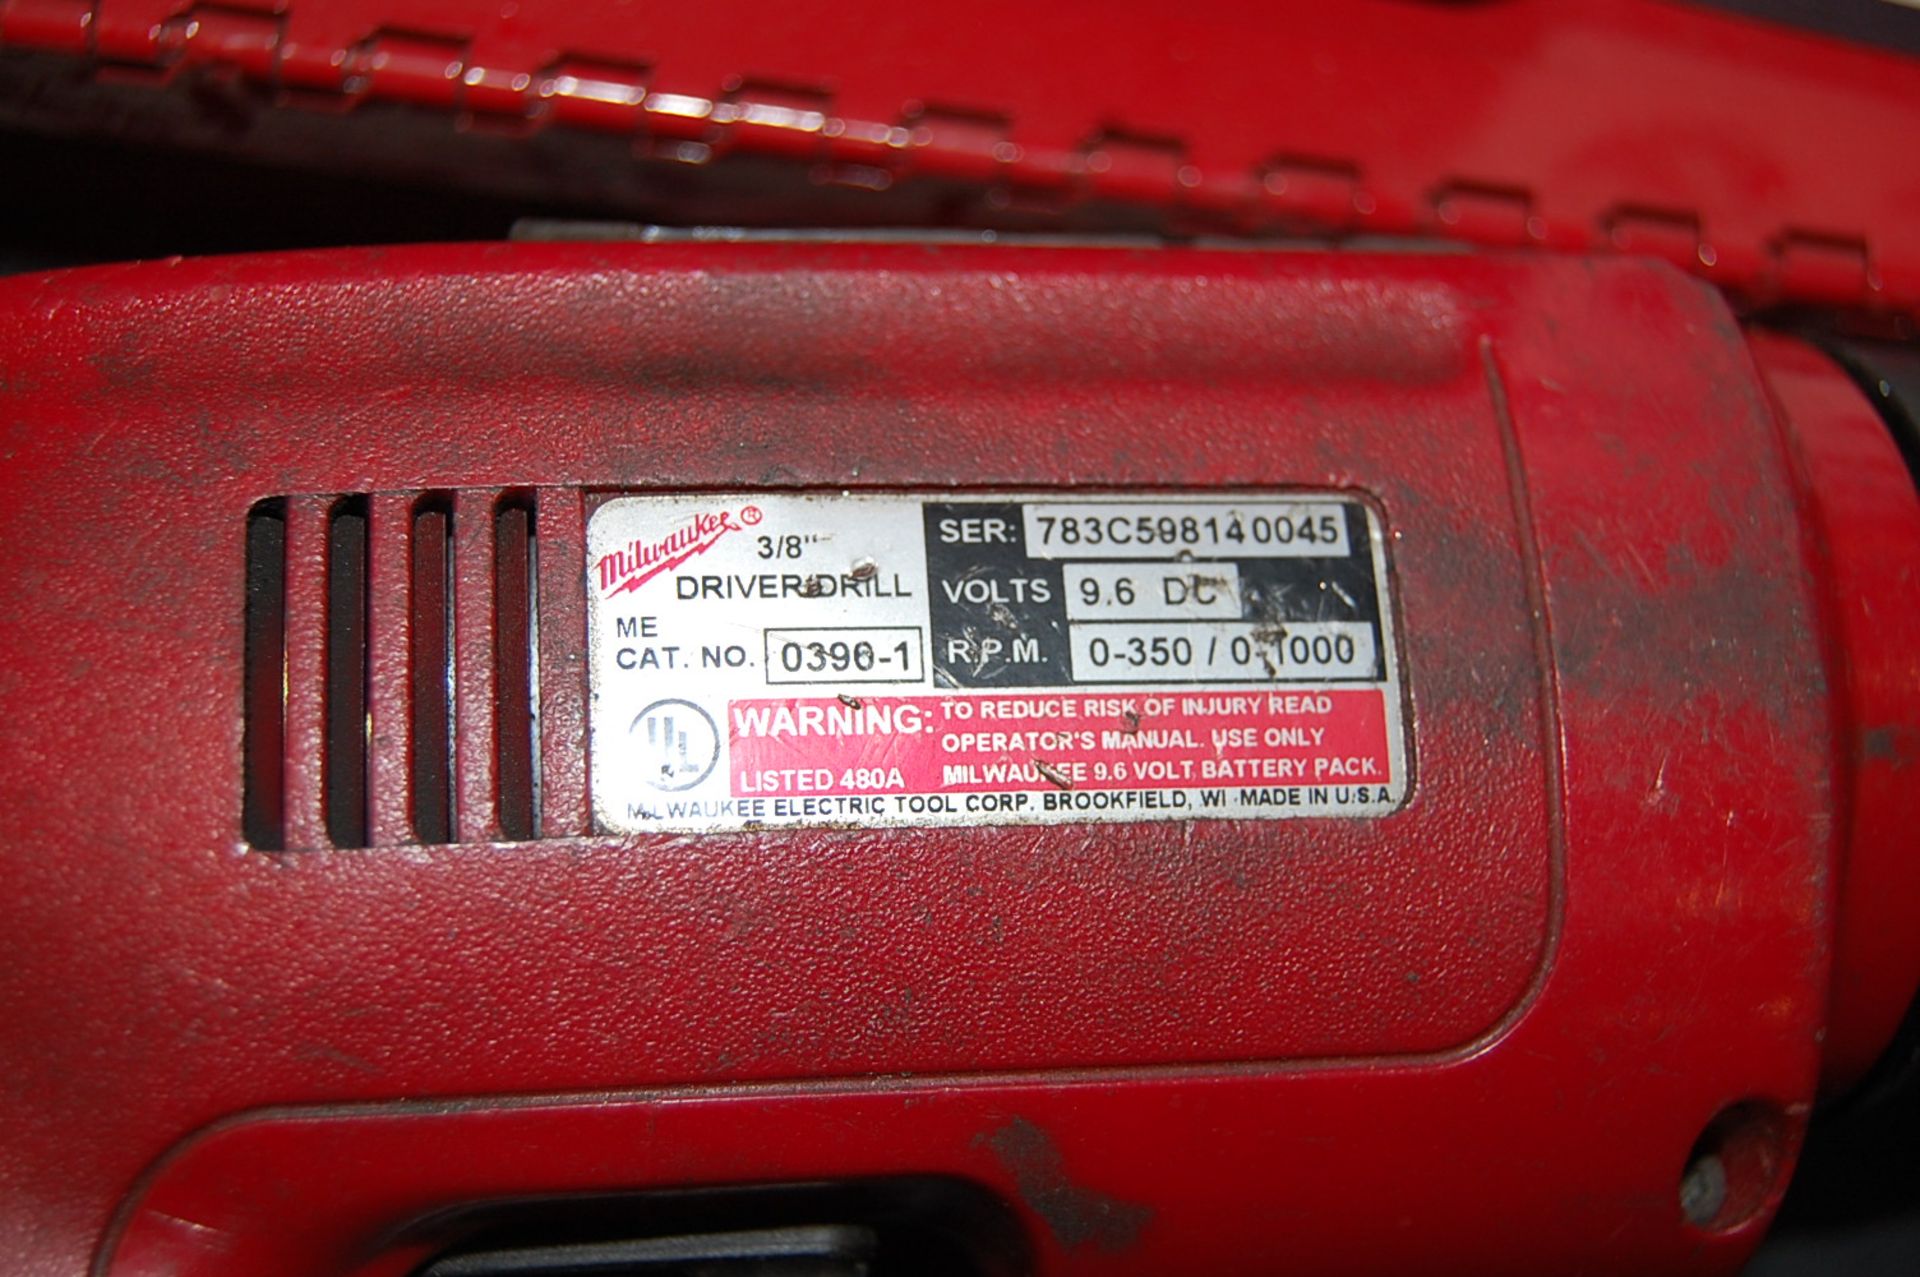 Milwaukee Cat # 0396-1 Cordless 3/8" Driver Drill - Image 3 of 4